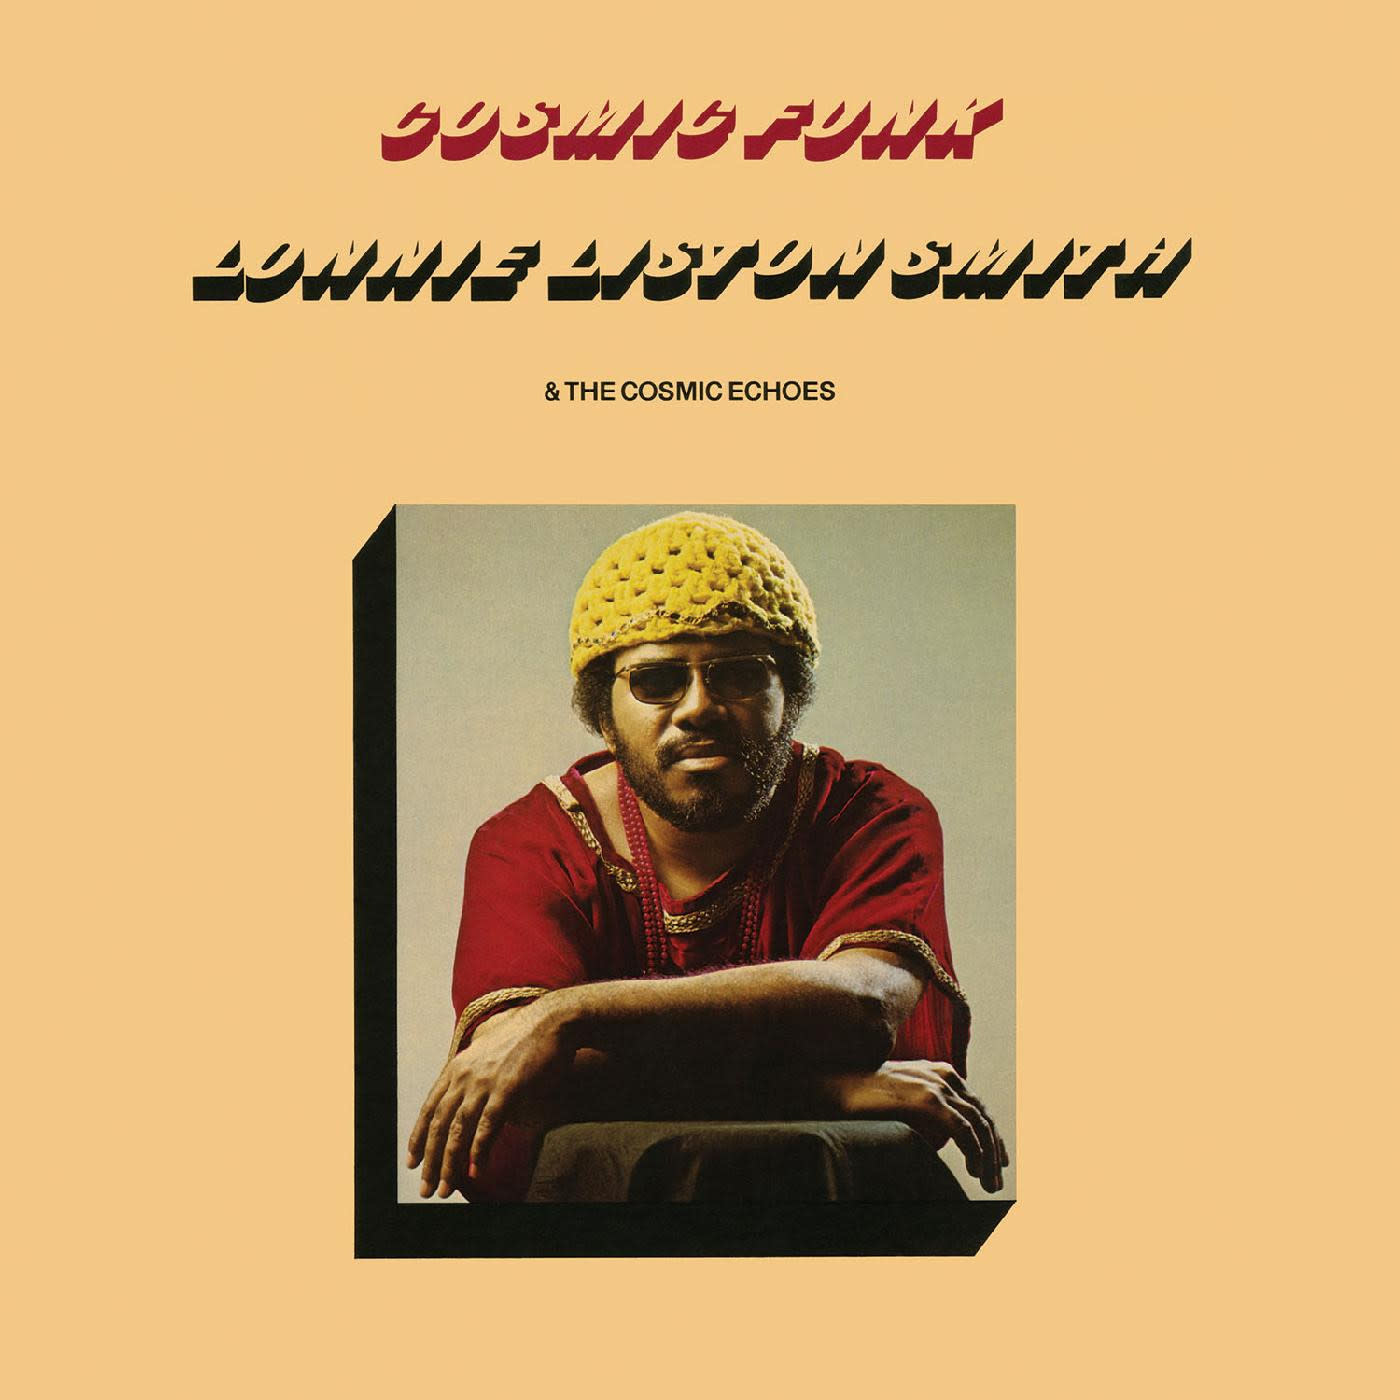 Jazz Lonnie Liston Smith & The Cosmic Echoes - Cosmic Funk (Real Gone 2022 Reissue)